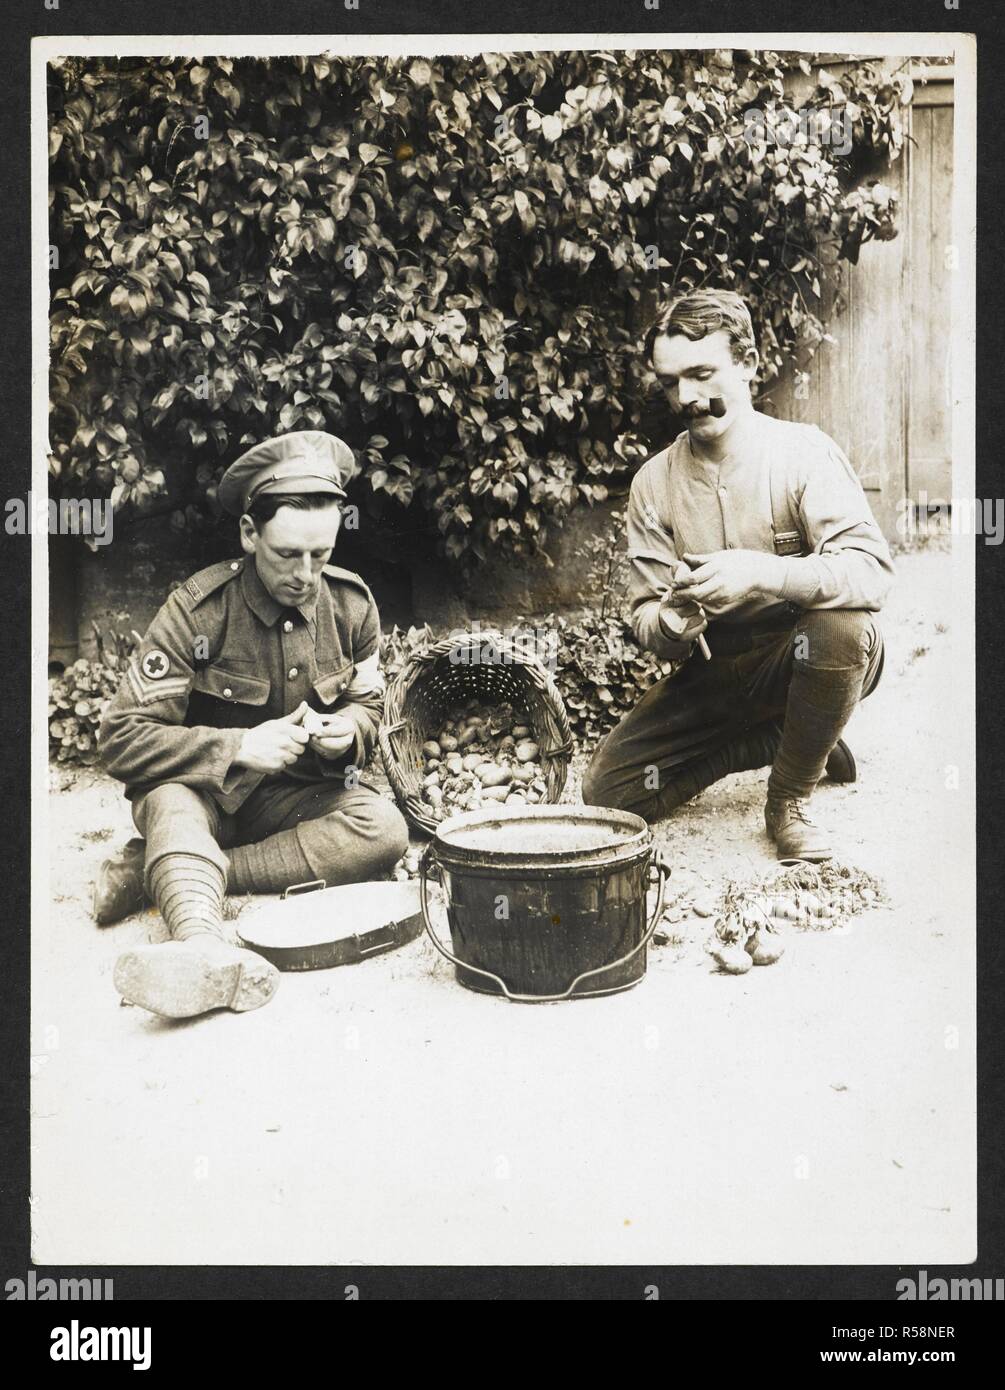 Red Cross orderlies at work [France]. Two orderlies peeling potatoes. 1915.  Record of the Indian Army in Europe during the First World War. 20th  century, 1915. Gelatin silver prints. Source: Photo 24/(321).